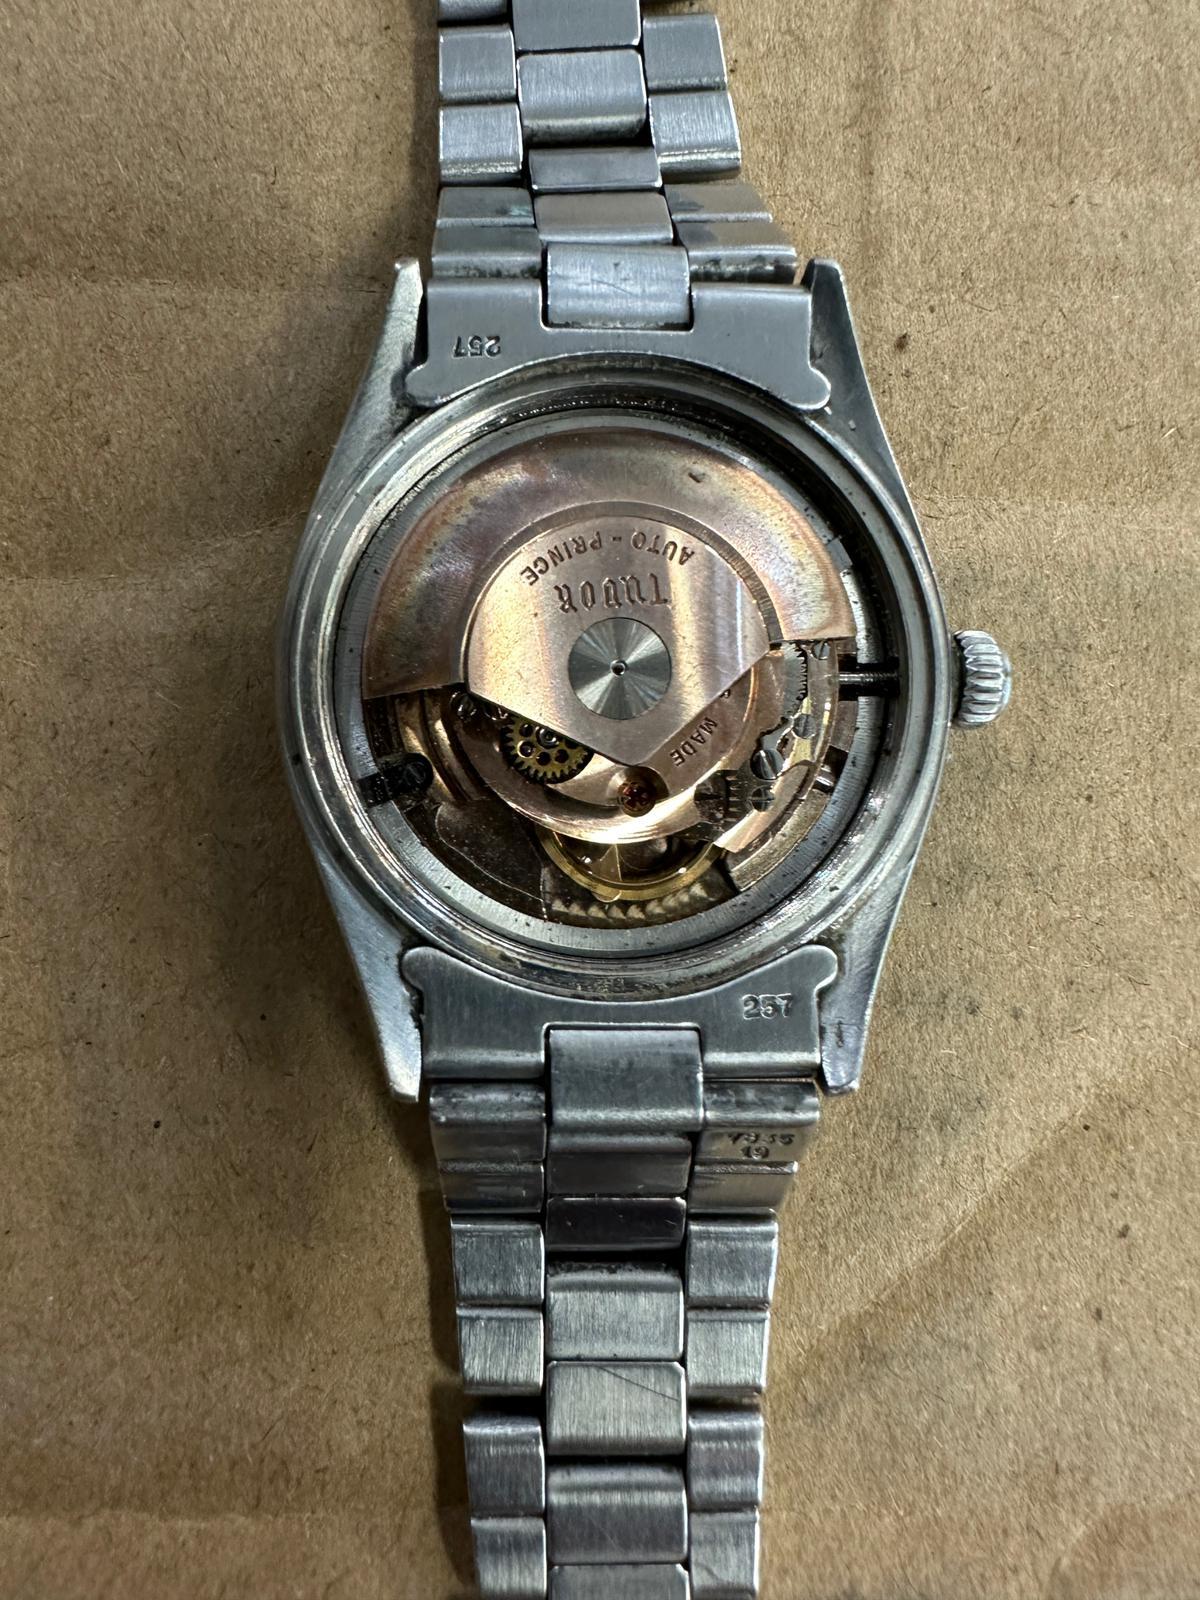 This Fine & Very Rare Tudor Rolex “Big Rose” 

Oyster-Prince c1962 Automatic Watch 

comes with original factory polish – great news for a collector!

 

~~~

 

Dating from 1962 (yet in excellent working order),

this elegant vintage timepiece is